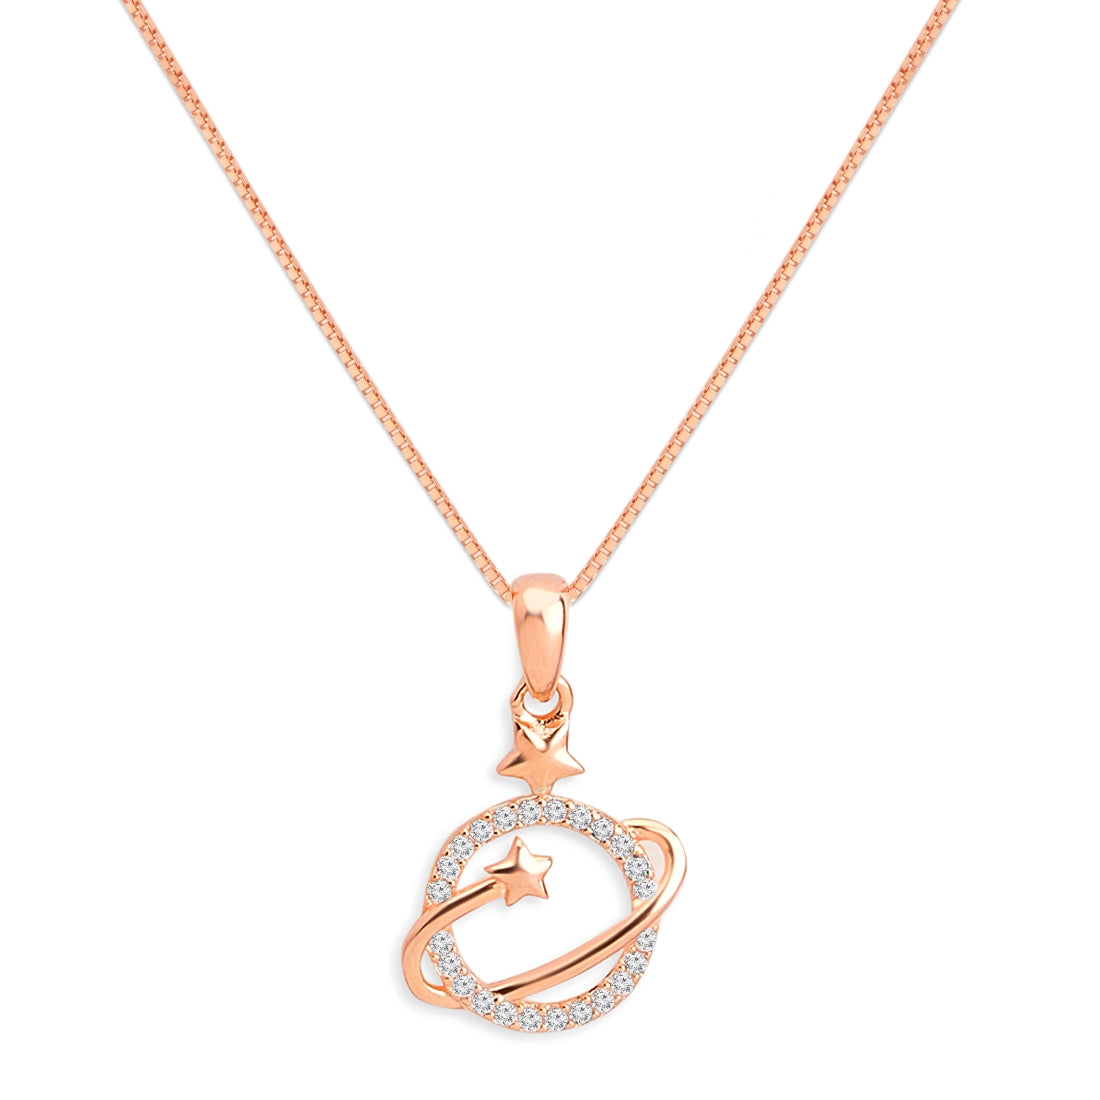 Starry Elegance Rose Gold Plated 925 Sterling Silver Pendant